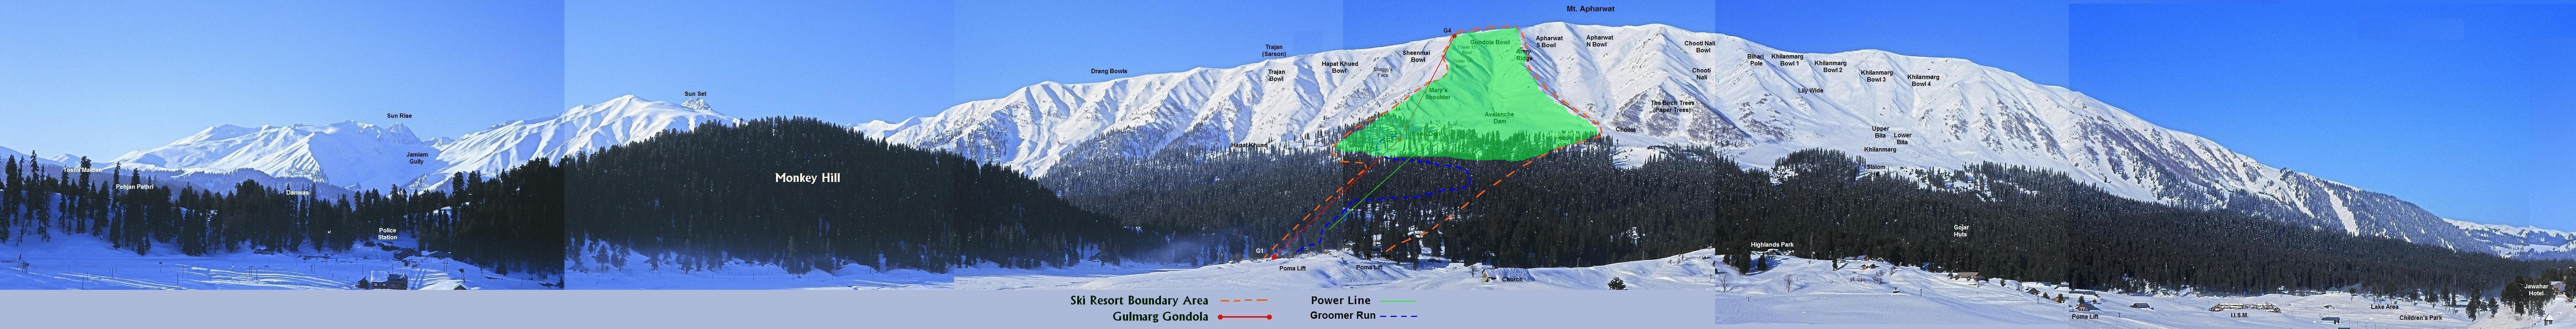 Ski patrol map with names and controlled area shaded green from gulmargsnowsafety.com